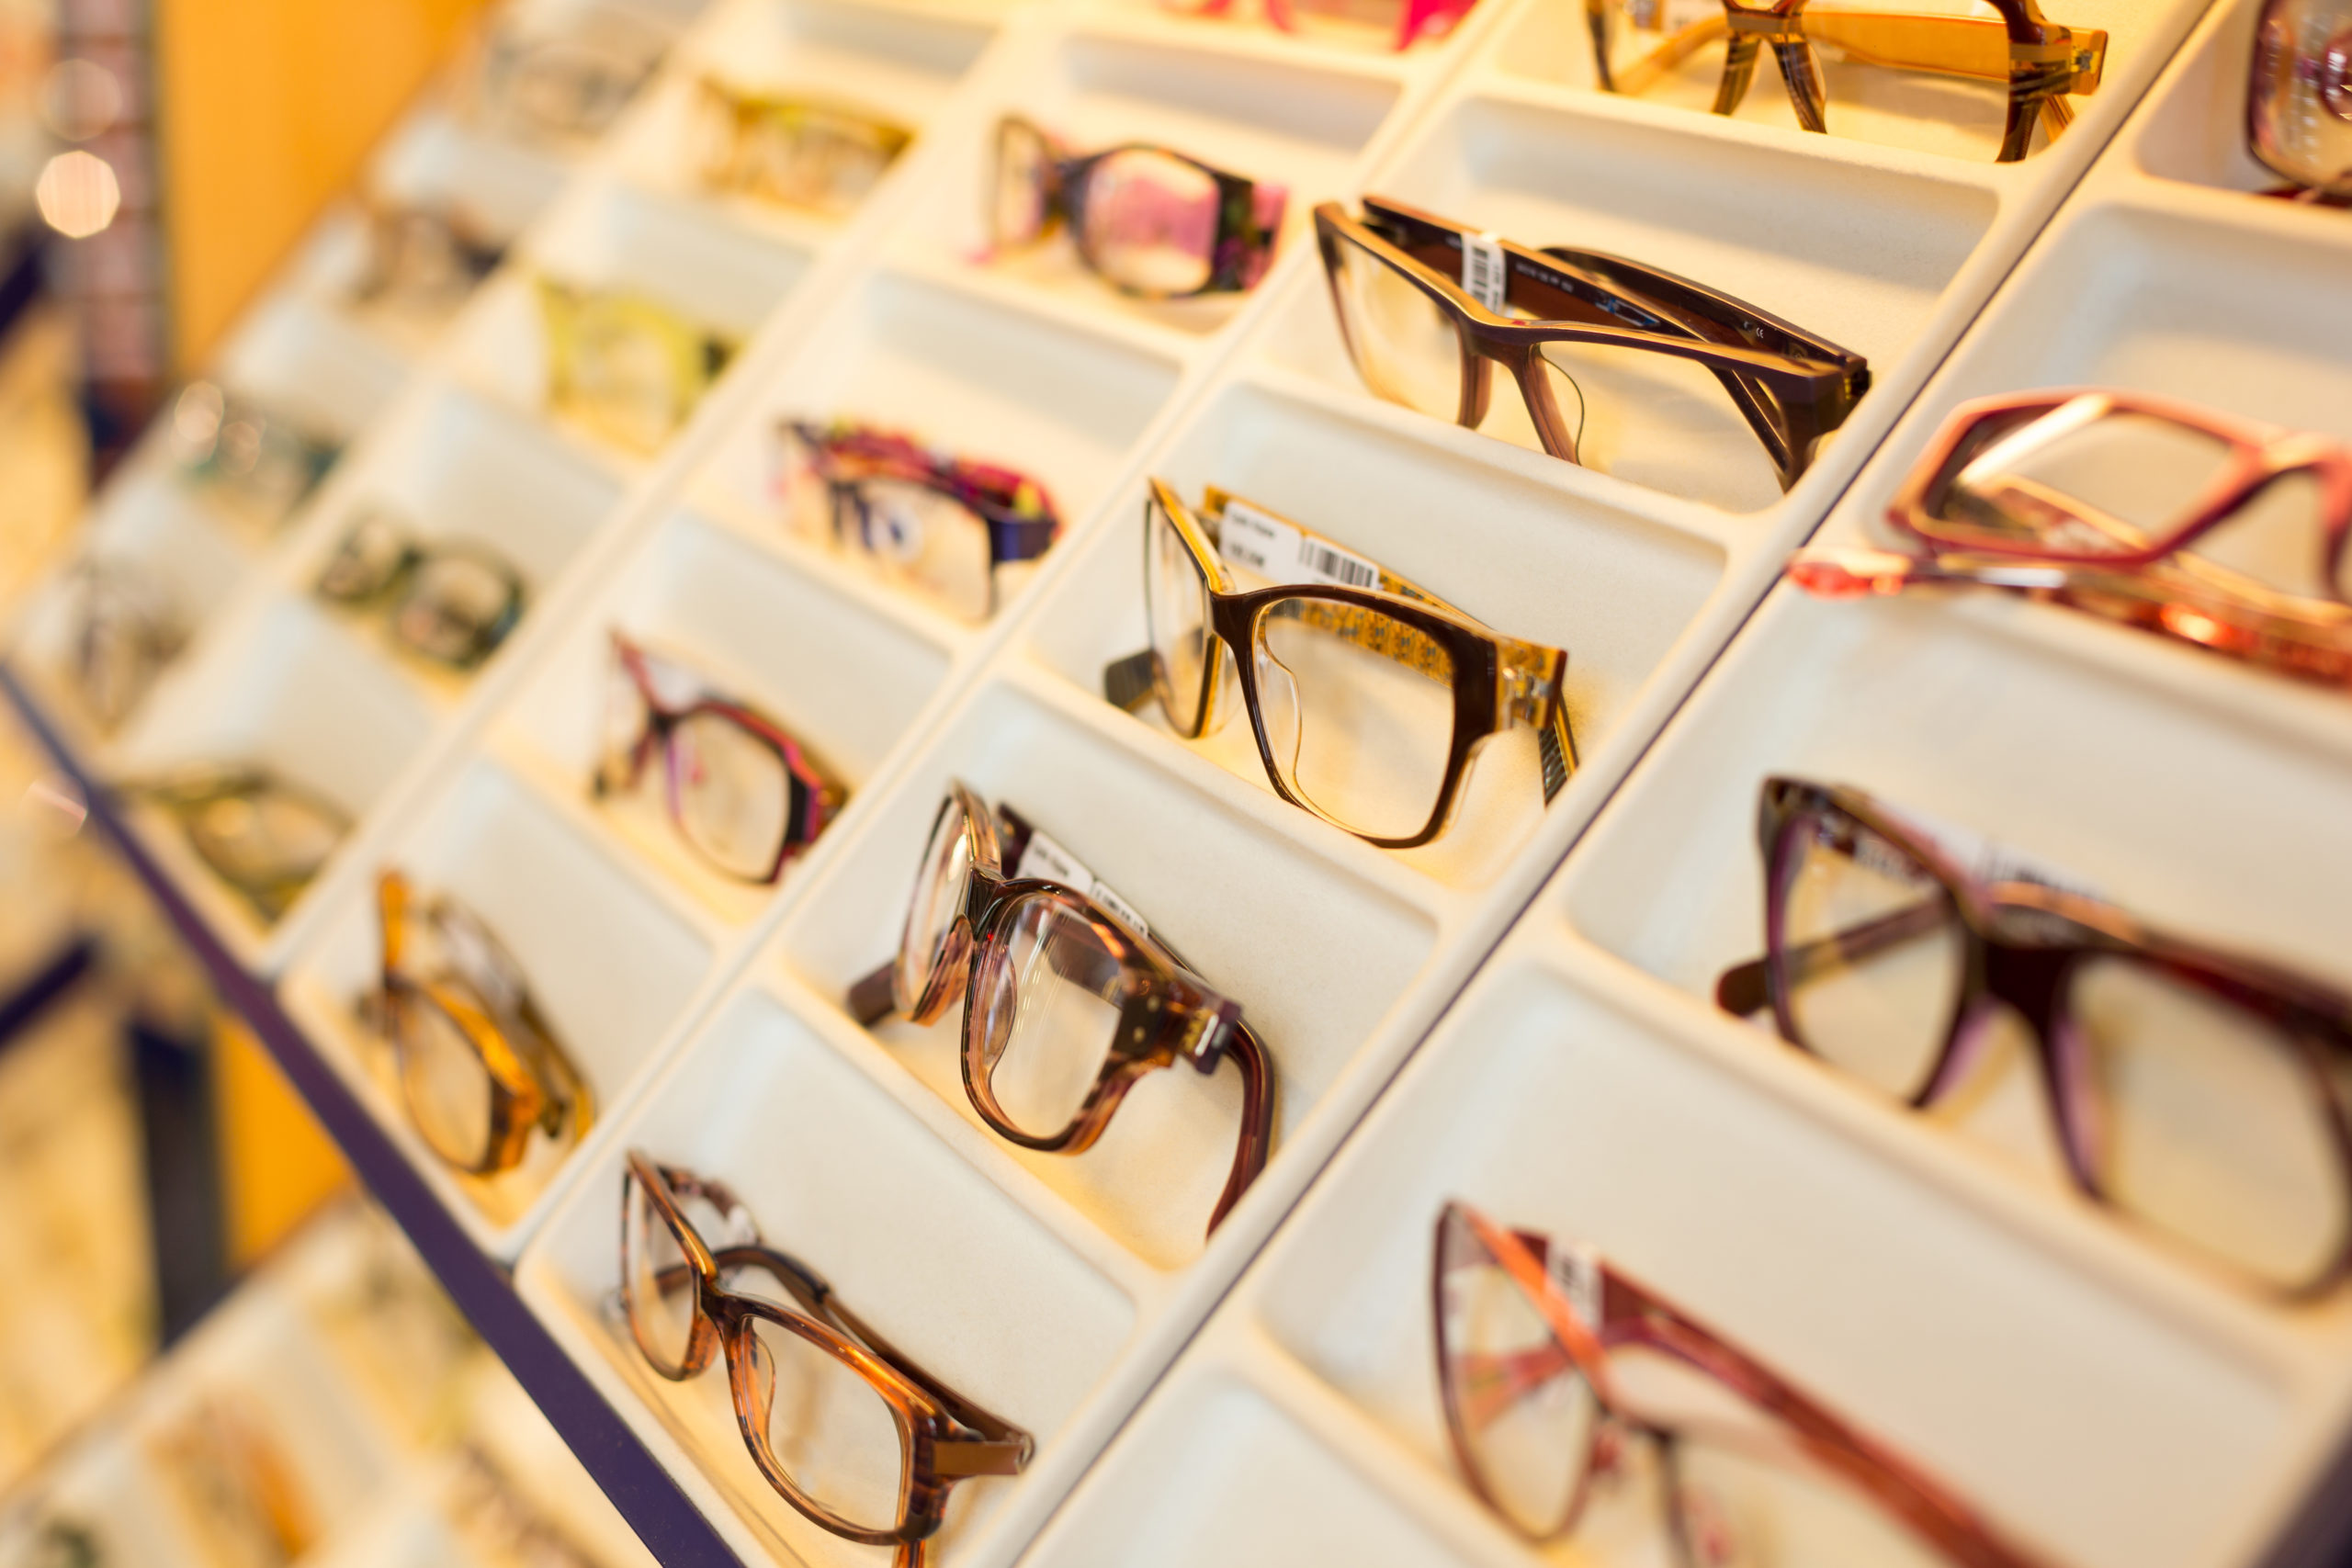 Personal Care,Optical & Lens,Blue Bay Spectacle Frame Dealers Sunglass Dealers-Rayban Spectacle Dealers Optical Lens Dealers Optical Goods Wholesalers Eyeglass 